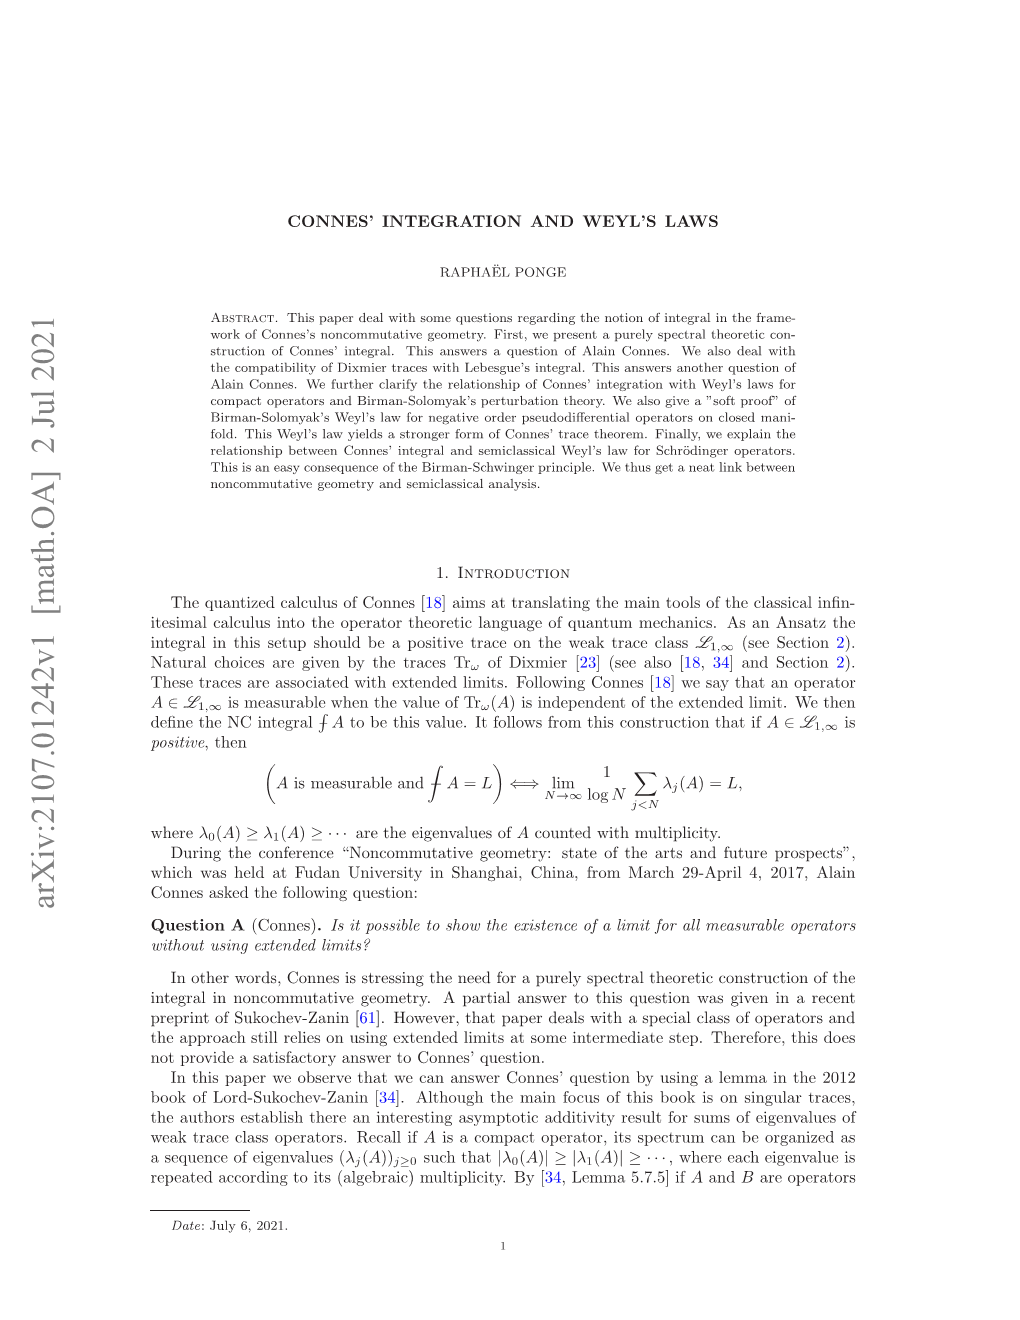 Arxiv:2107.01242V1 [Math.OA] 2 Jul 2021 Euneo Ievle ( Eigenvalues of Sequence a Eetdacrigt T Agbac Utpiiy Y[ by Multiplicity